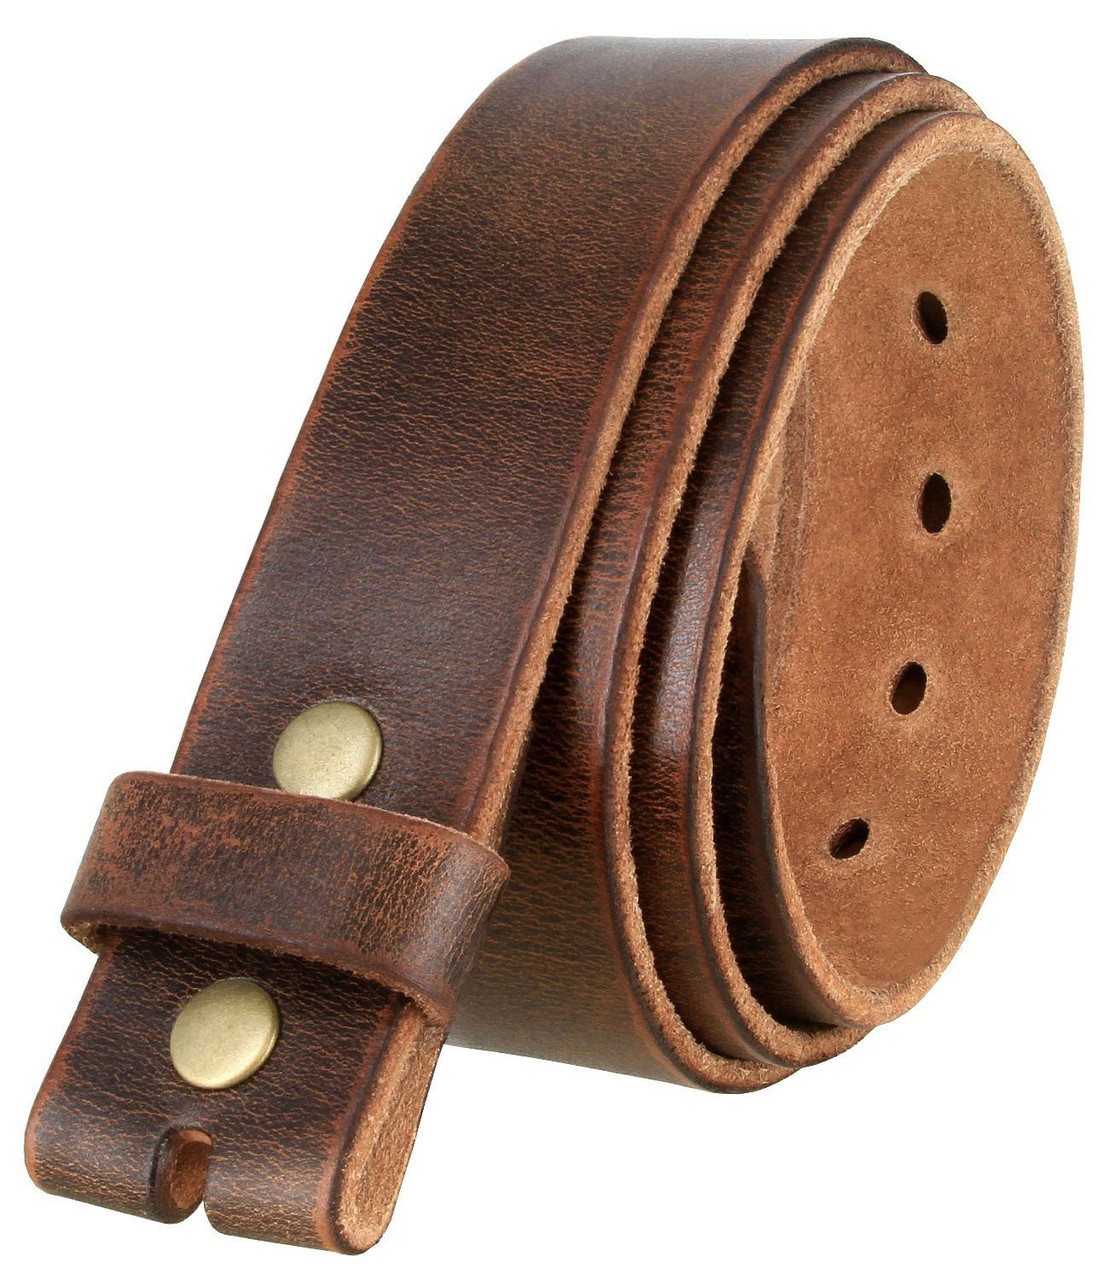 Vintage Distressed Black Brown Leather Belt 100% Real Leather Full Grain  Veg Tan Aged With Antique Silver or Brass Buckle 